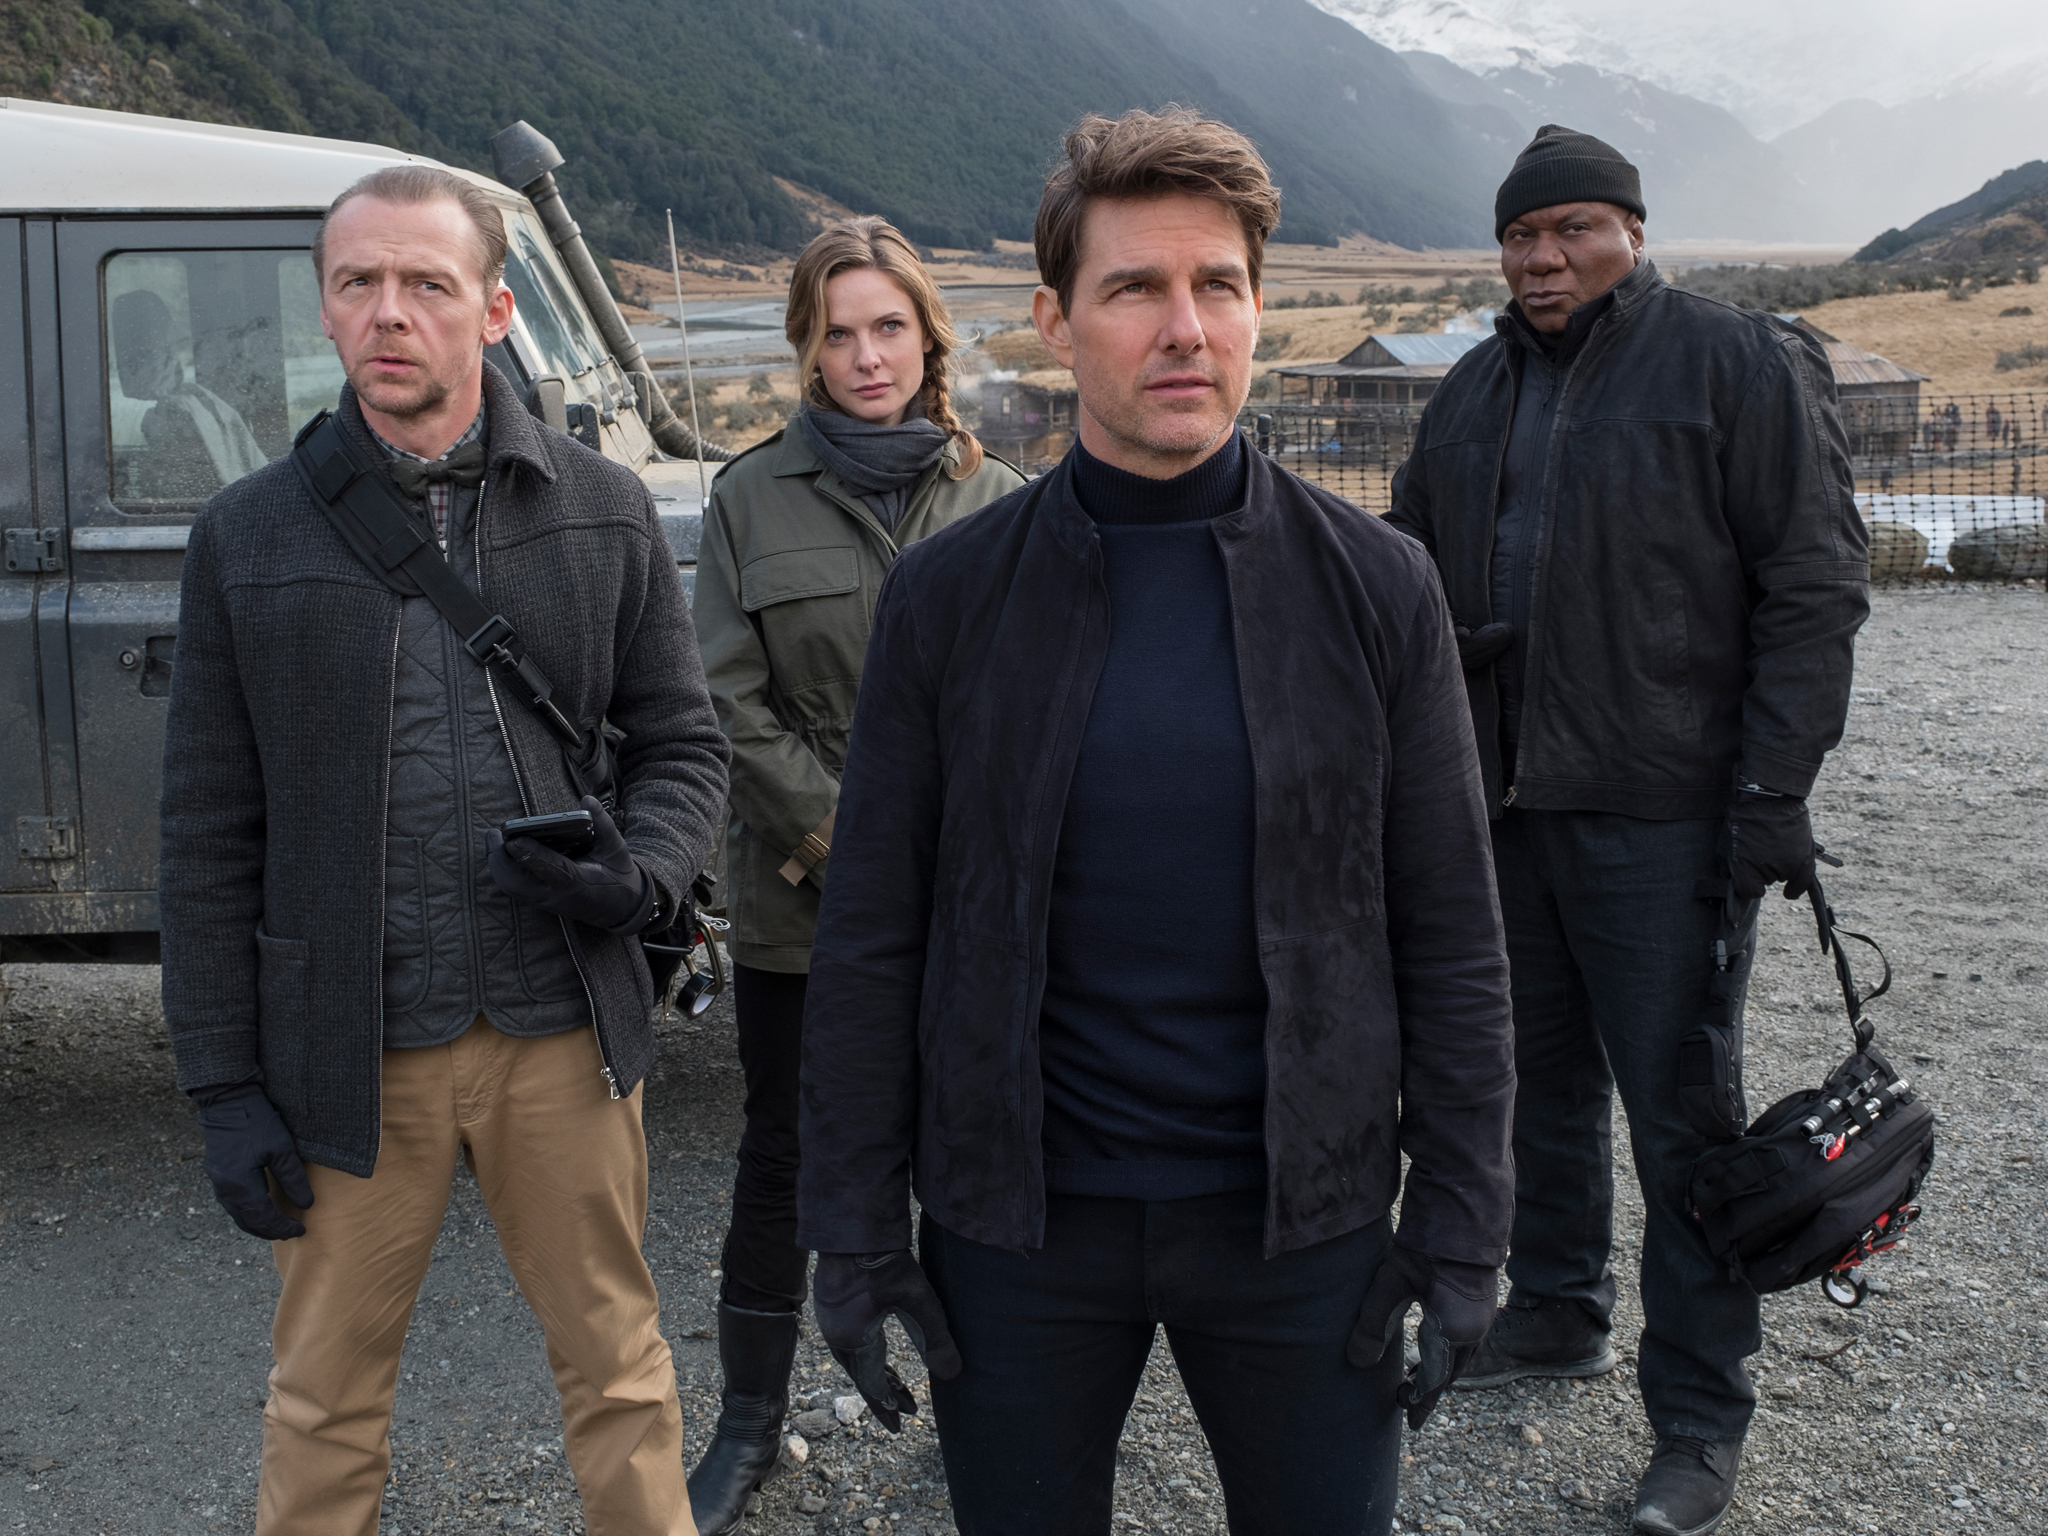 Mission Impossible Fallout 2018, directed by Christopher McQuarrie